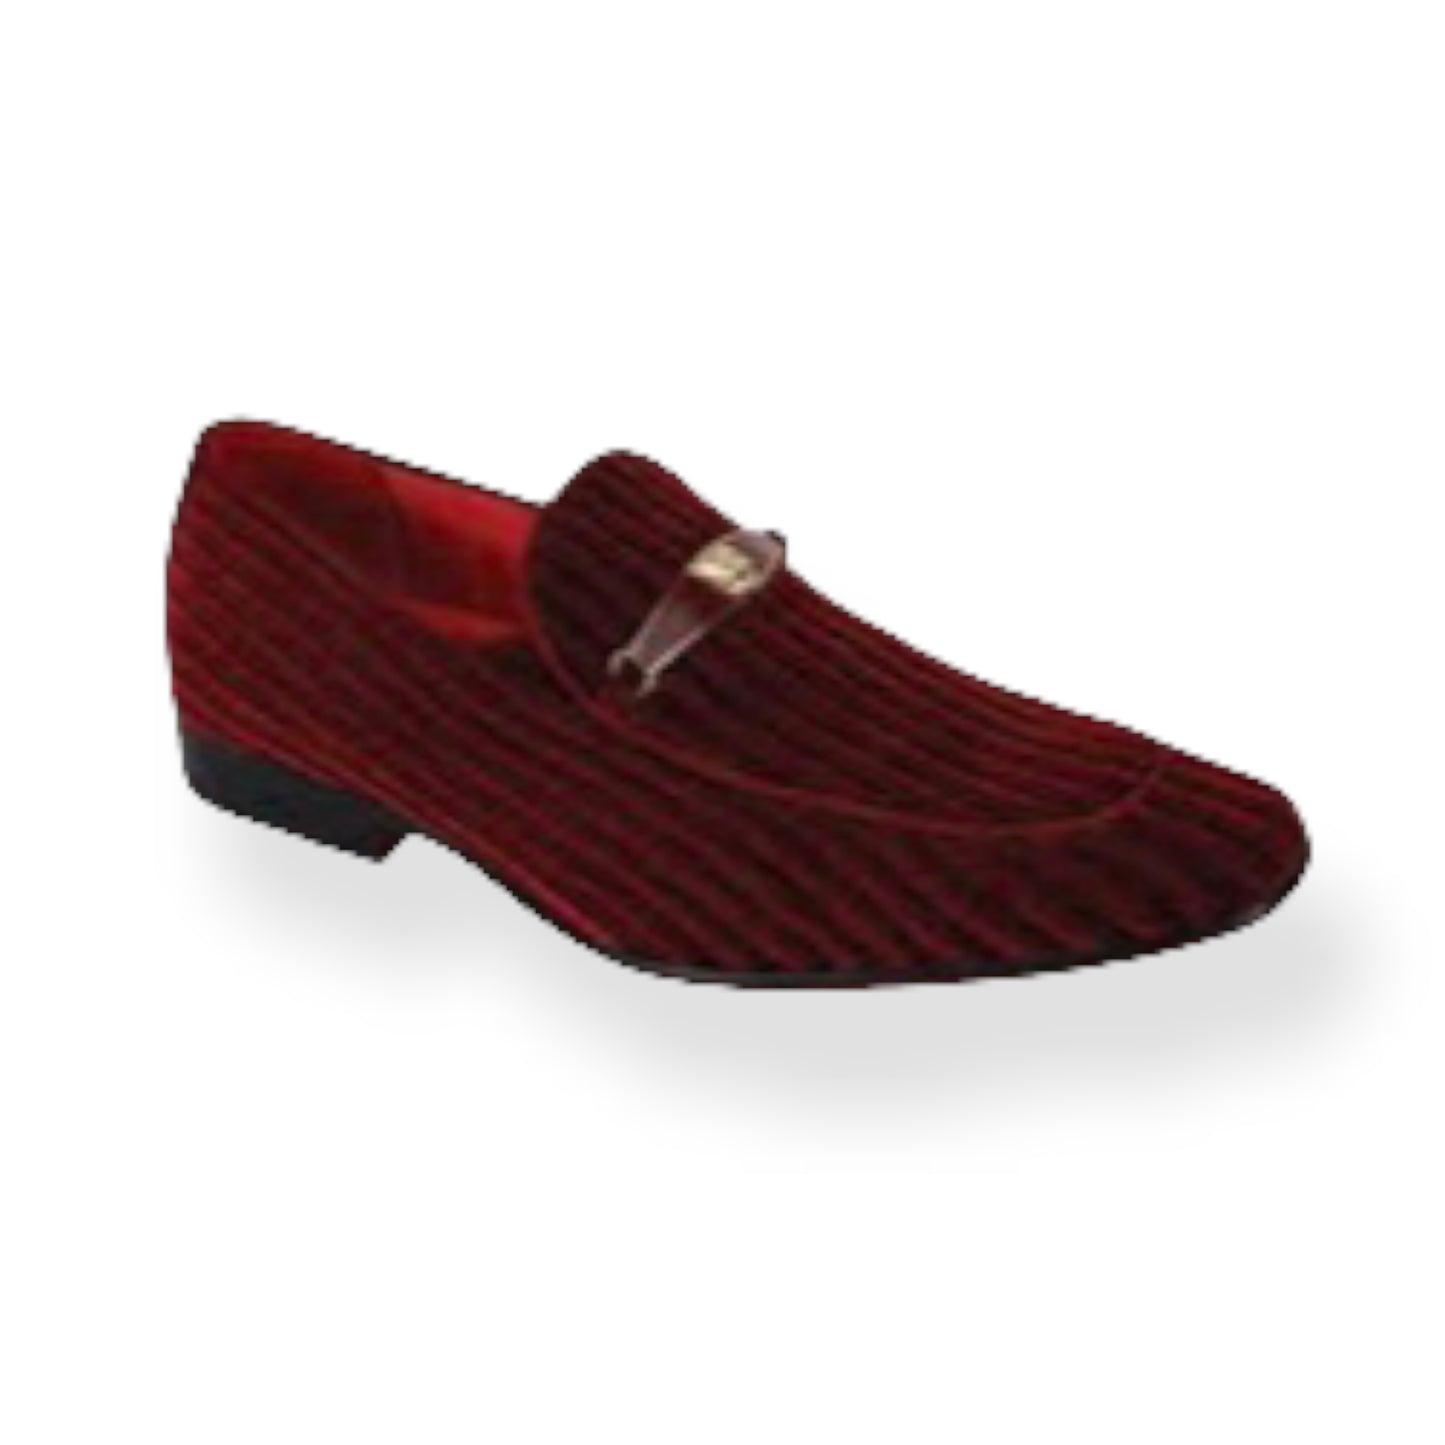 AFTER MIDNIGHT: Corduroy Dress Shoe 6946